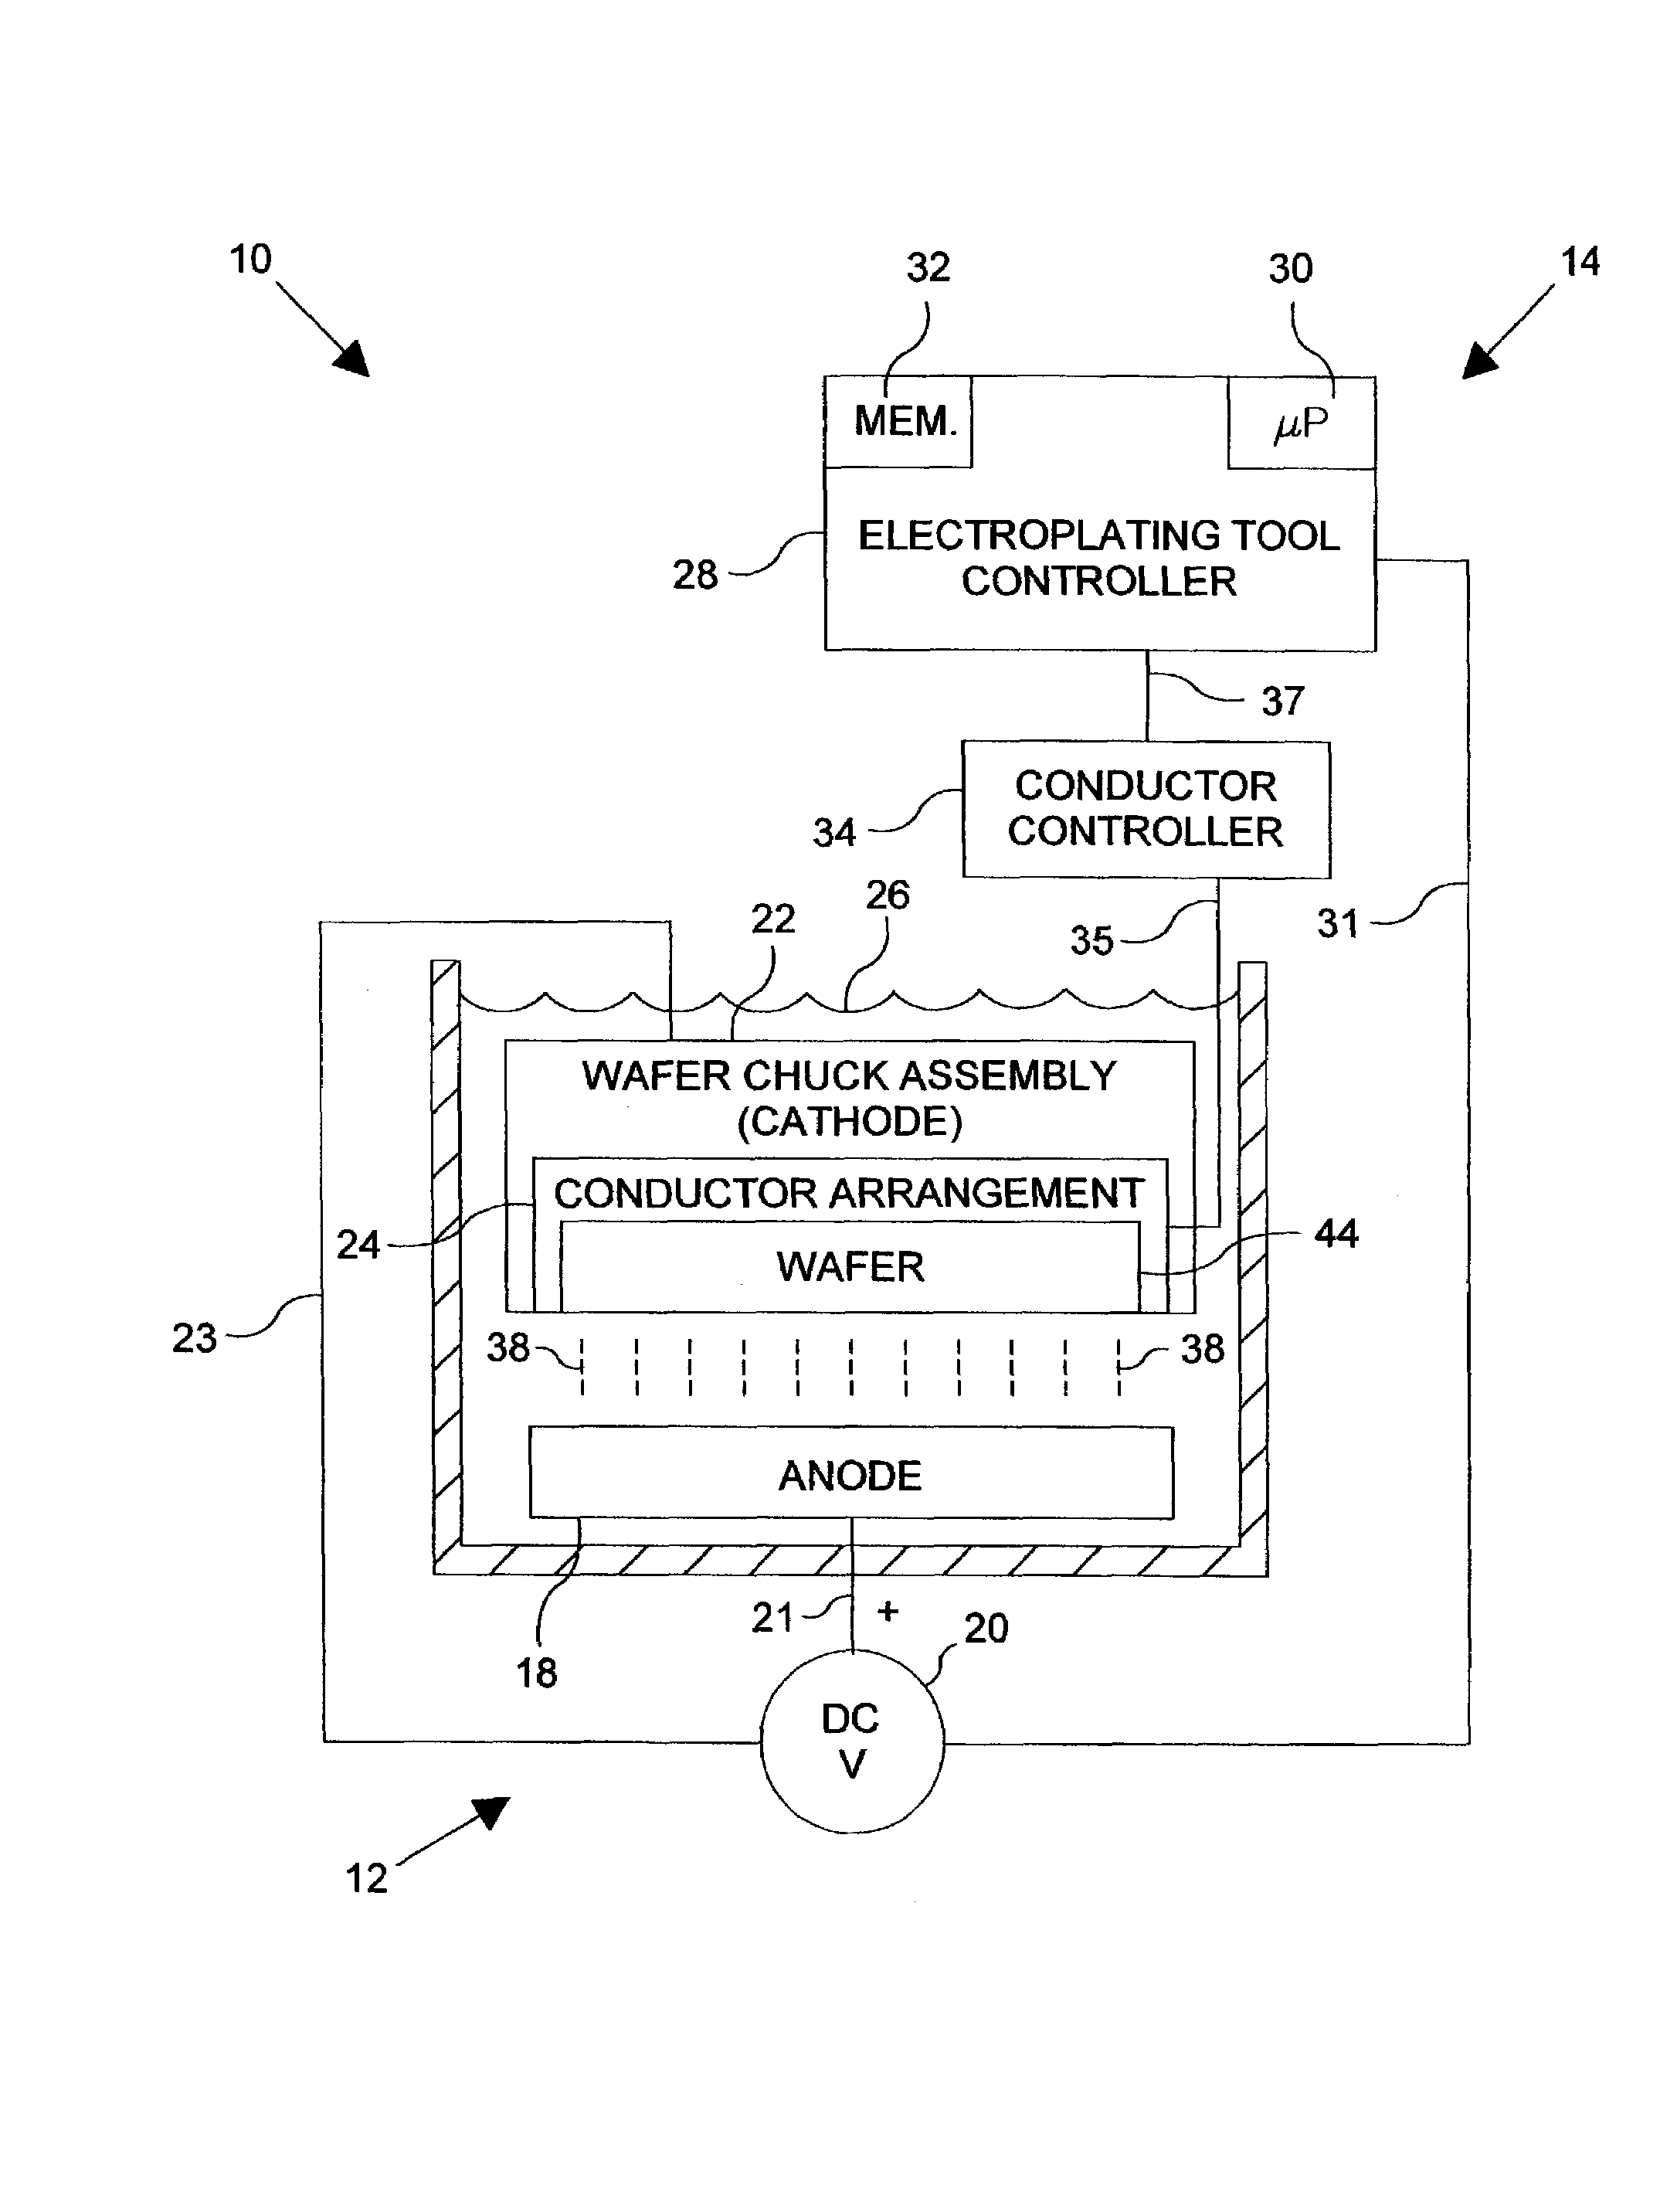 Electroplating tool for semiconductor manufacture having electric field control